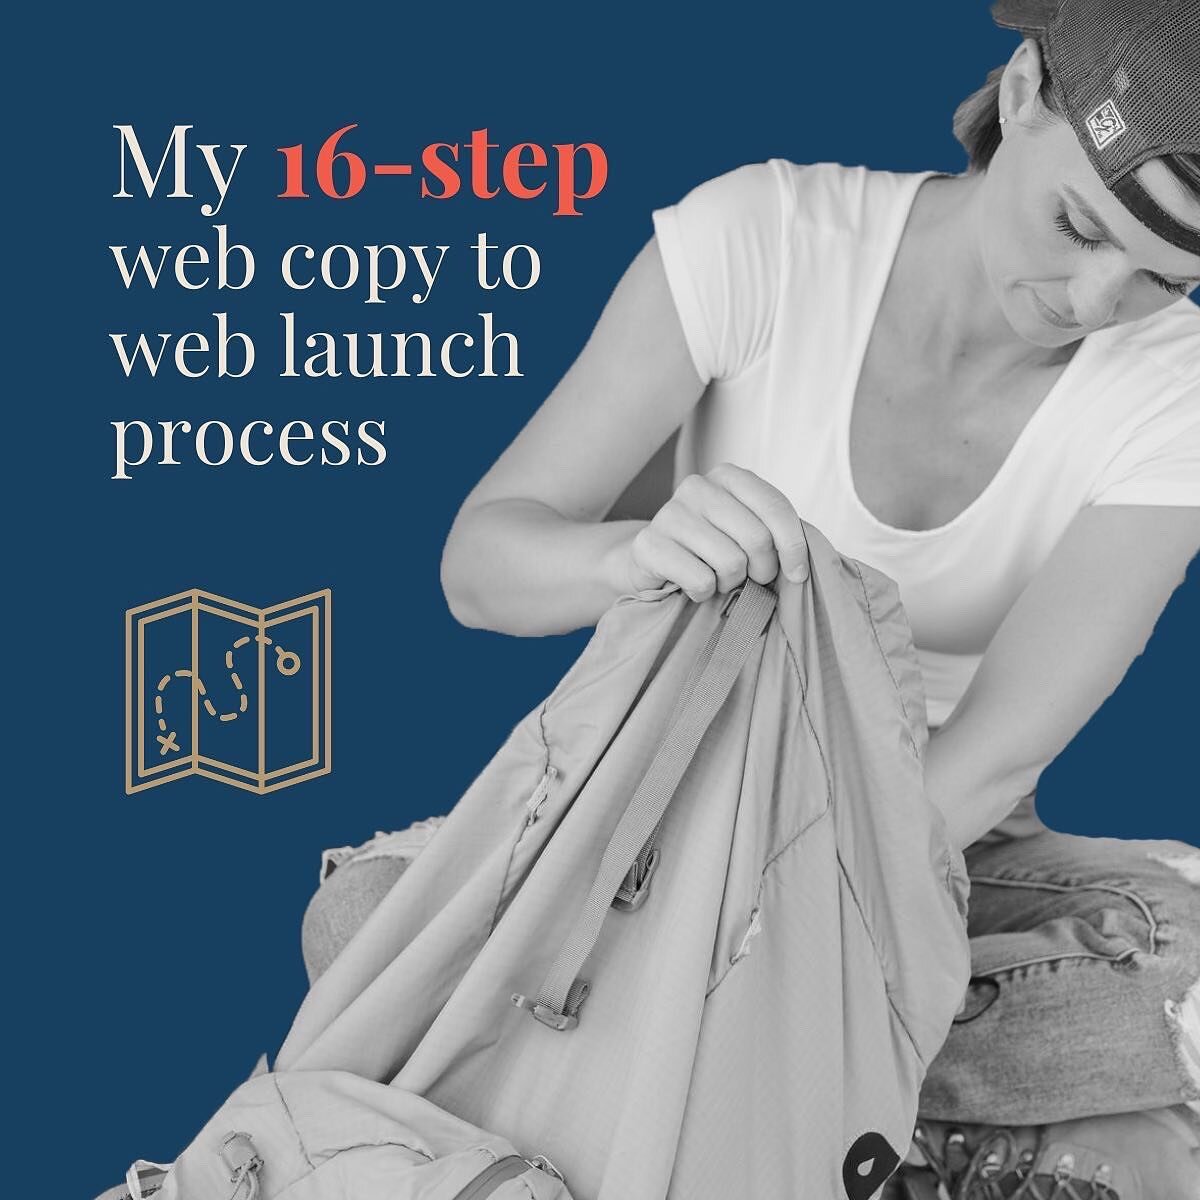 PART TWO:

Writing web copy doesn't start until Step 8. 
And I check in with the client 4-5 times.
Seems excessive, right?

Well, it is. For some businesses. I'm not going to suggest this for an HVAC company.

But for others, the setup is the most im